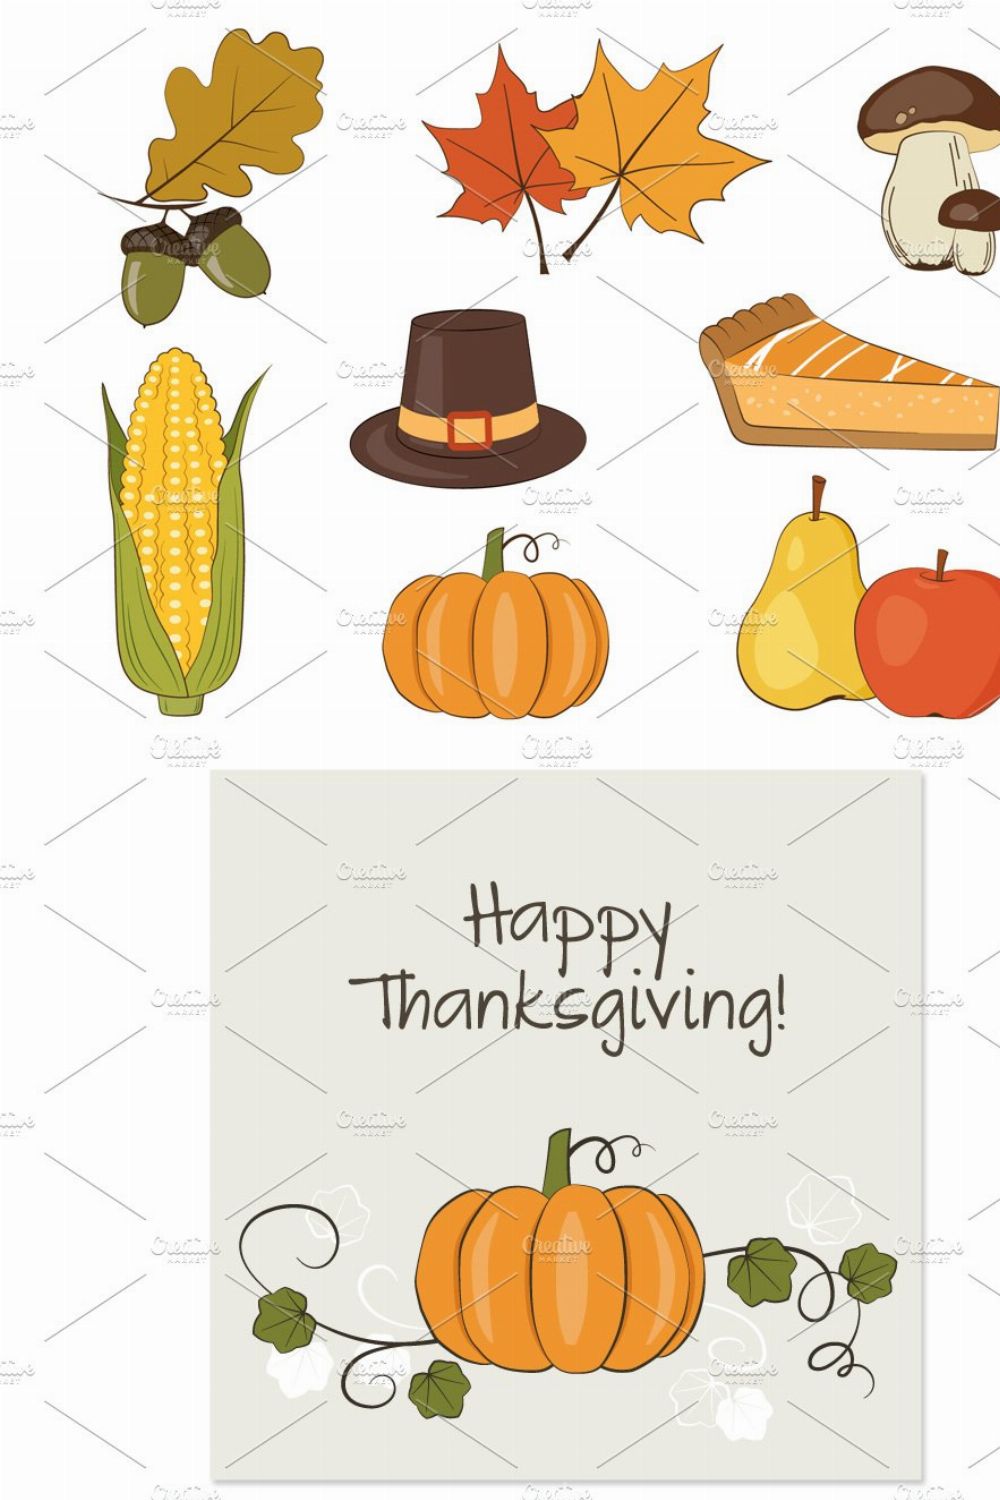 Thanksgiving Day pinterest preview image.